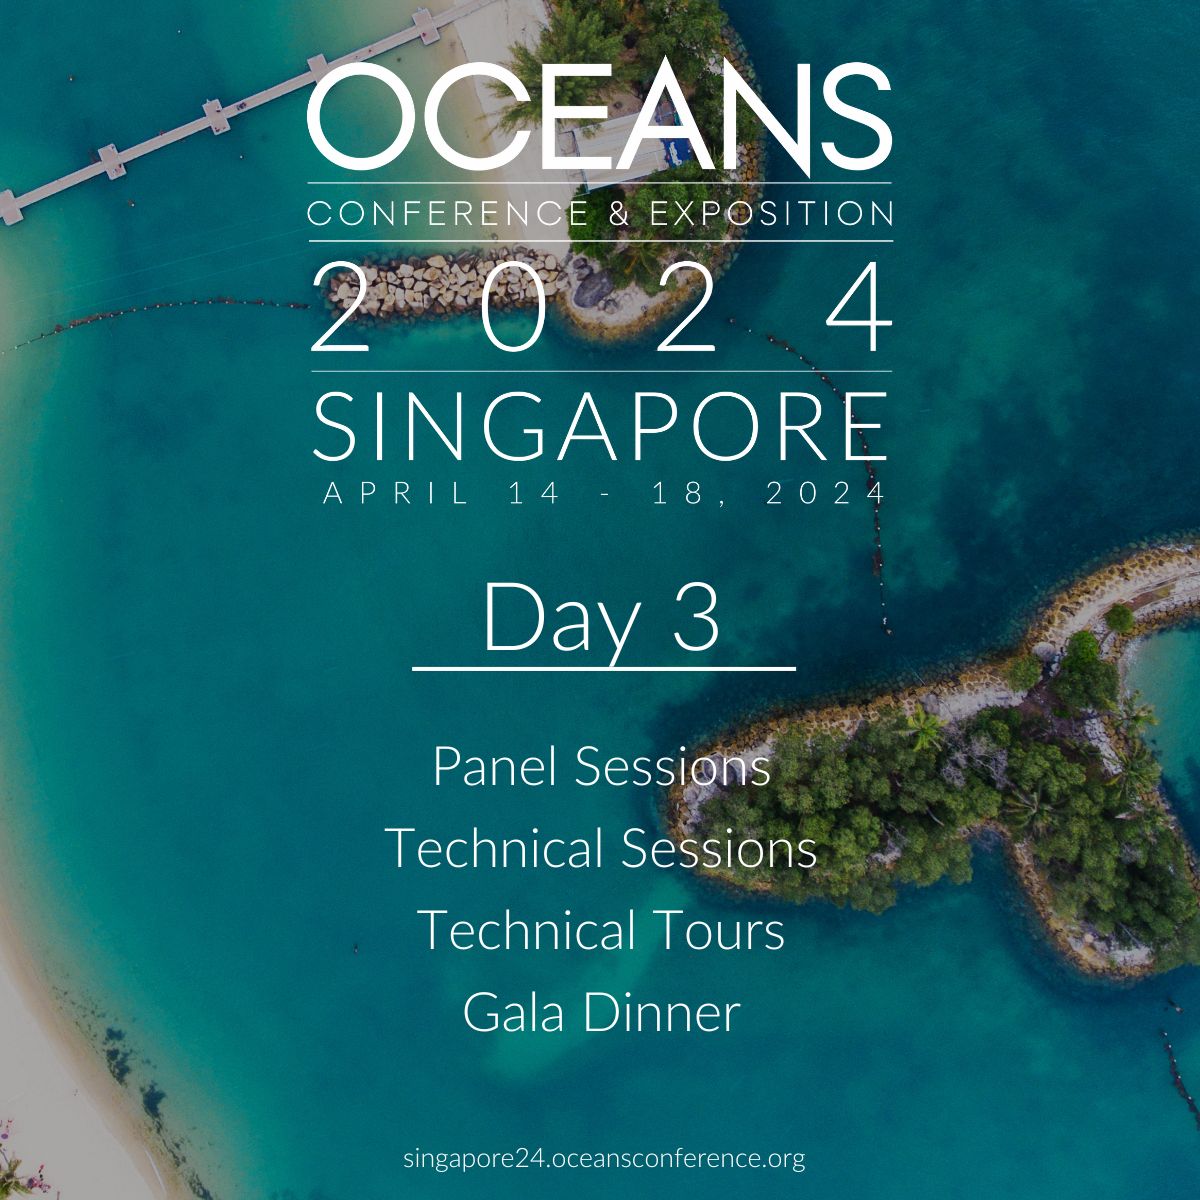 Day 3 at OCEANS 2024 Singapore awaits! 🌊 Dive into enriching technical sessions, tours, and panel discussions. Visit the exhibition and join us for an unforgettable Gala tonight! Questions? Ask the chatbot: rajmis.github.io/conf_chatbot/ #OCEANS2024Singapore #OCEANSFanatic